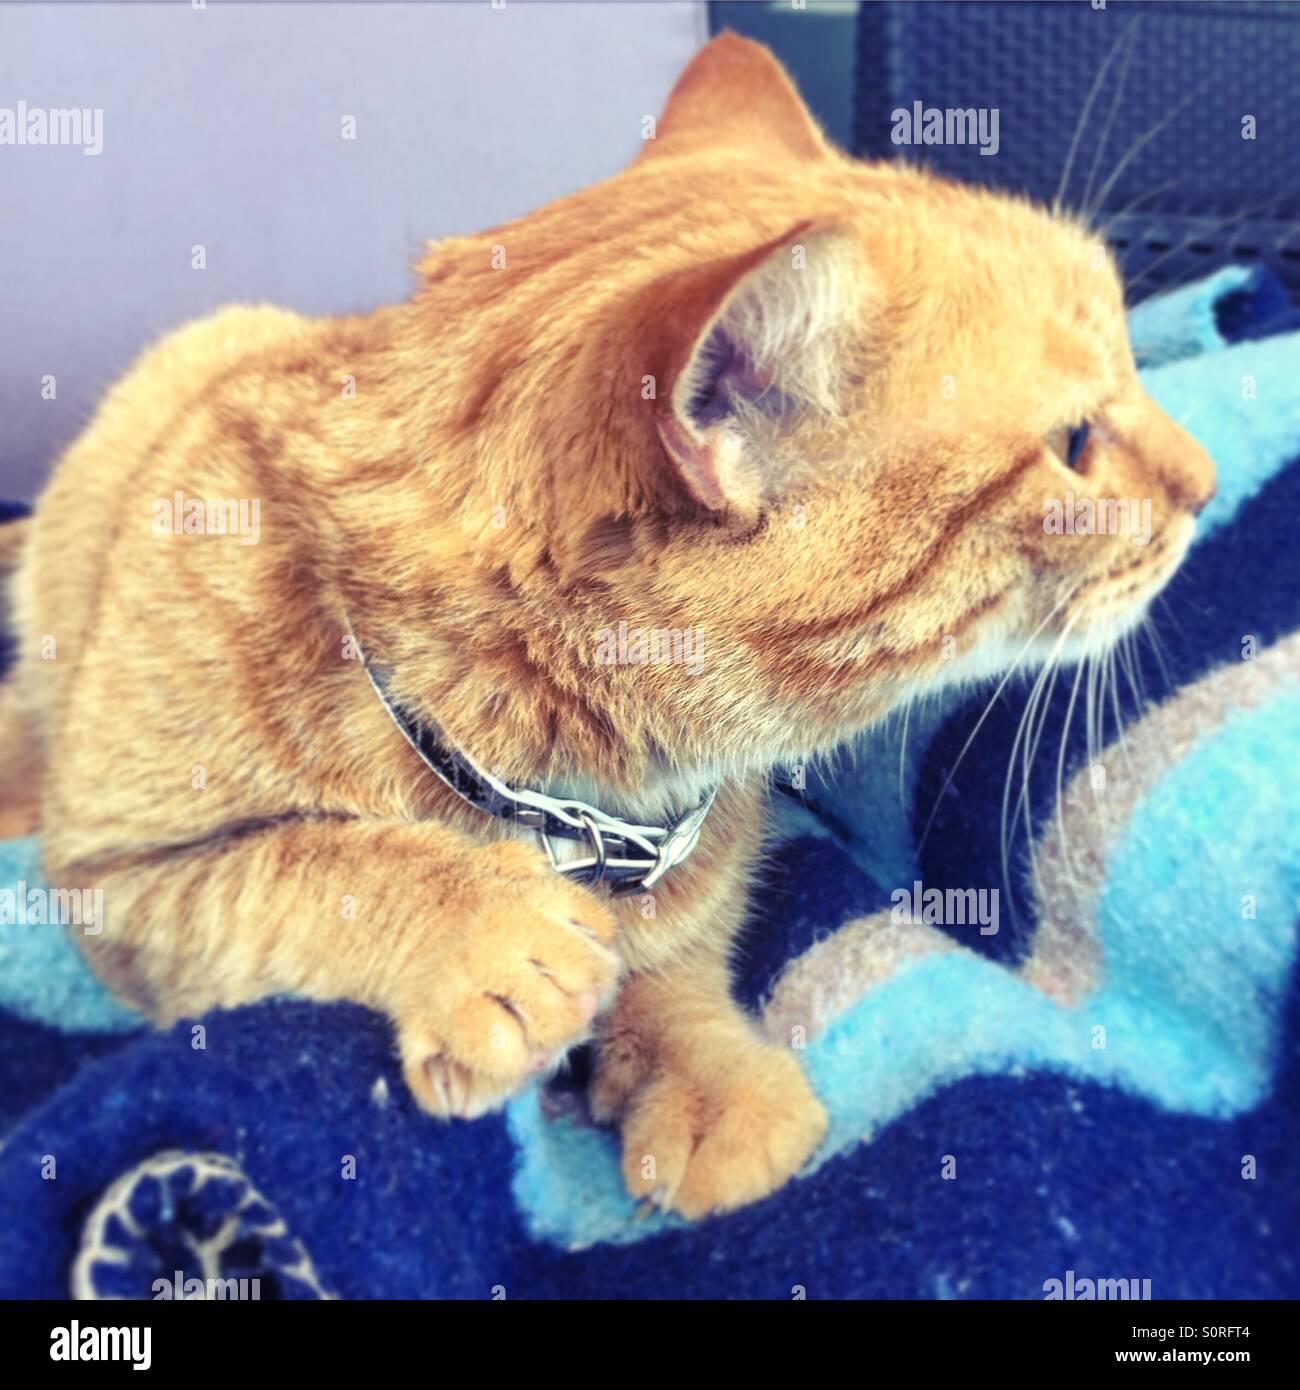 Distracted cat on a blue blanket Stock Photo